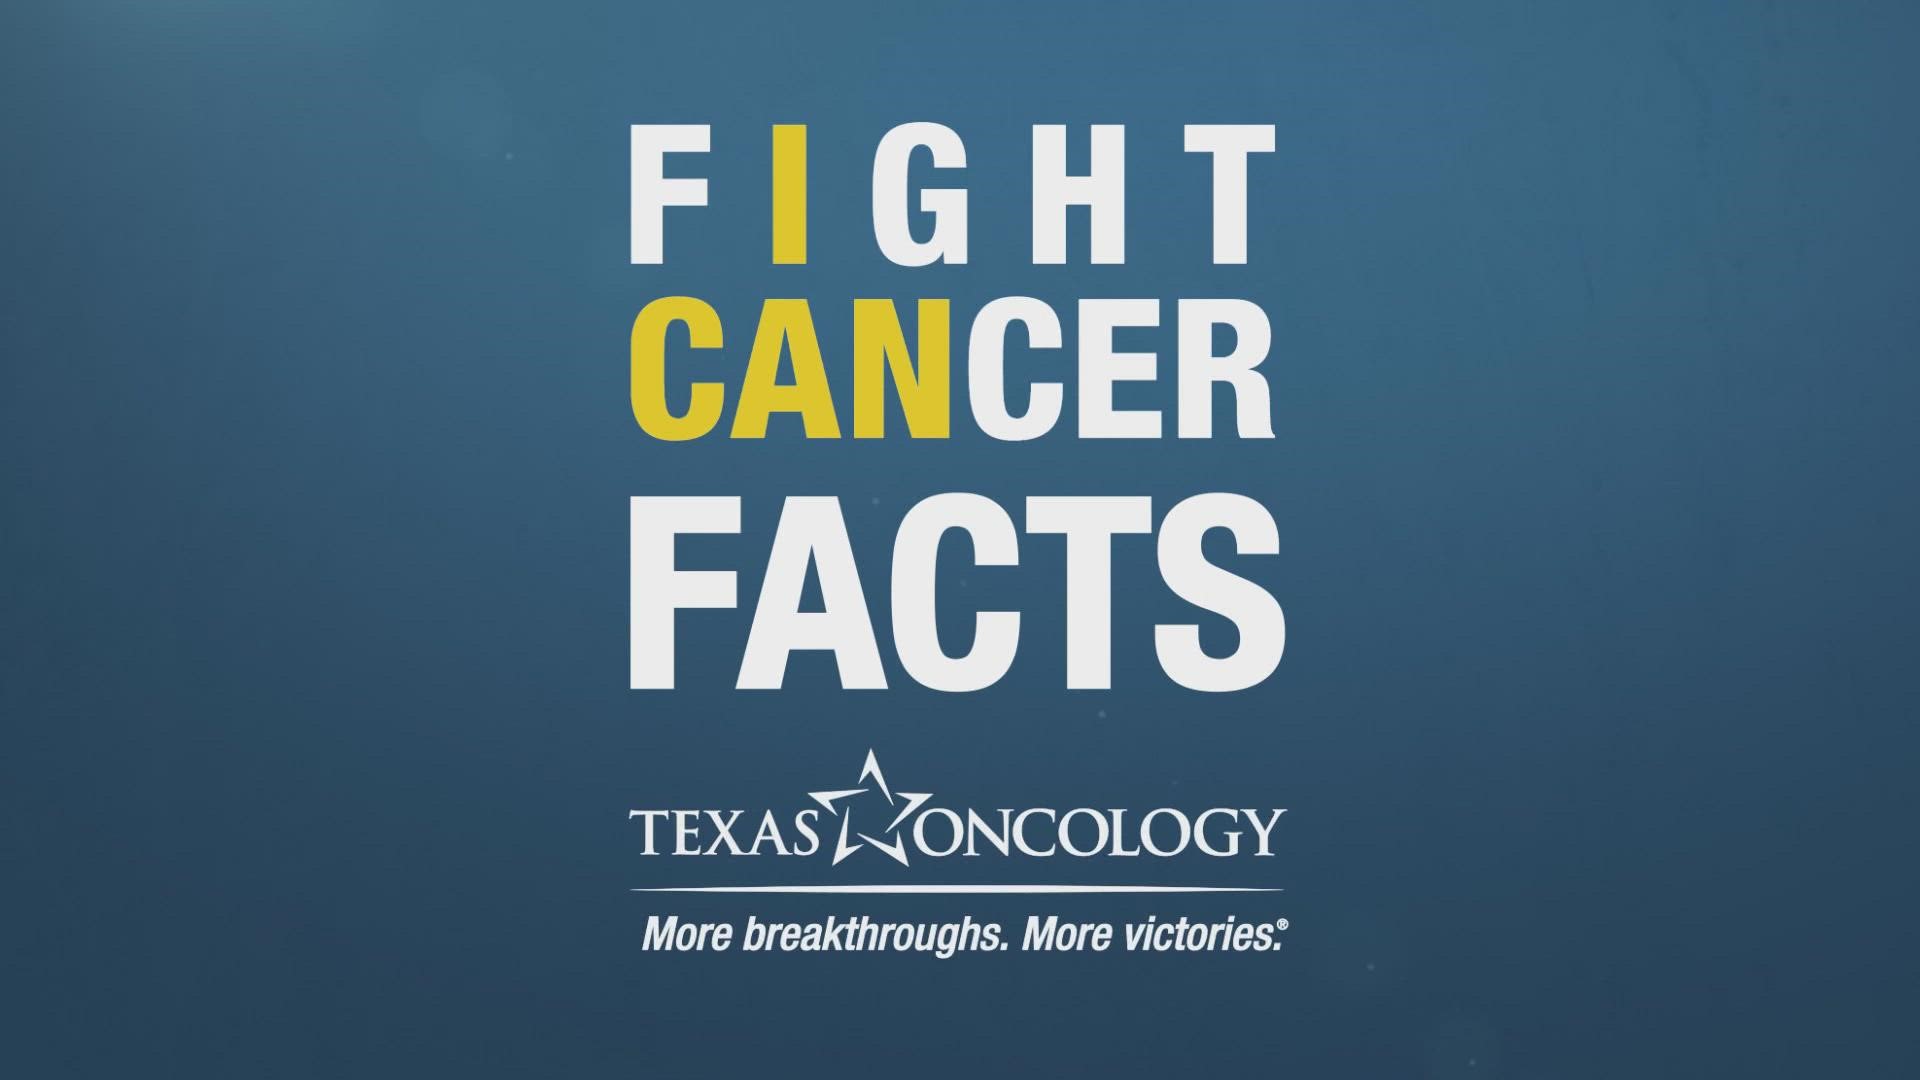 Local Texas Oncology doctor shares how to lower the risk of prostate cancer with early detection before it spreads to achieve a nearly 100% chance of survival.